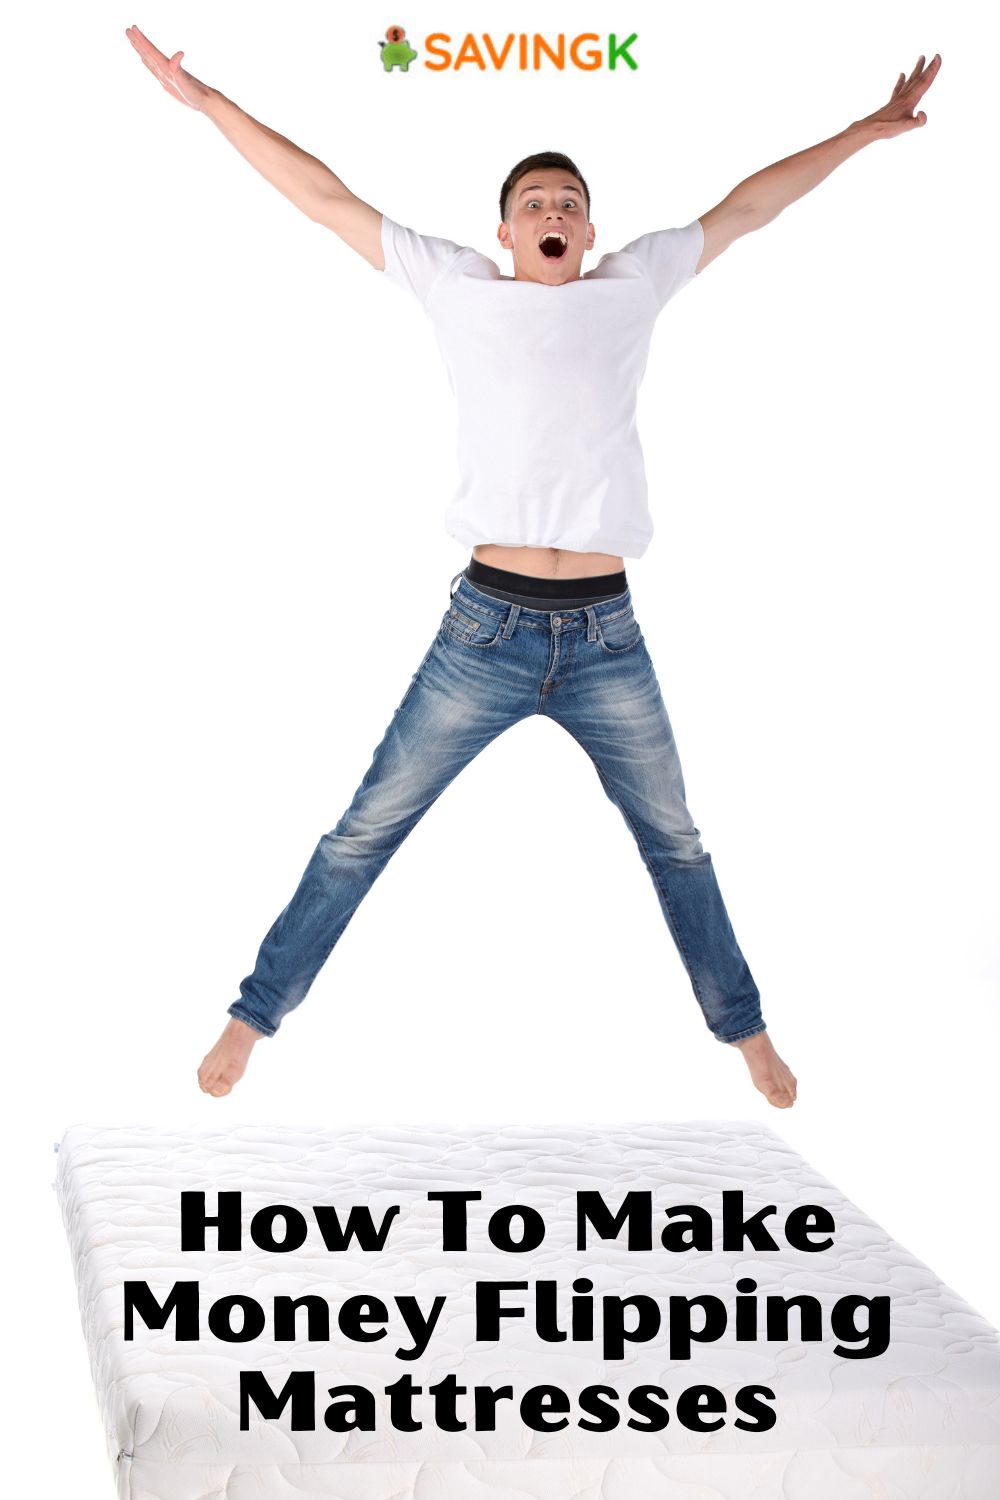 How To Make Money With Mattresses